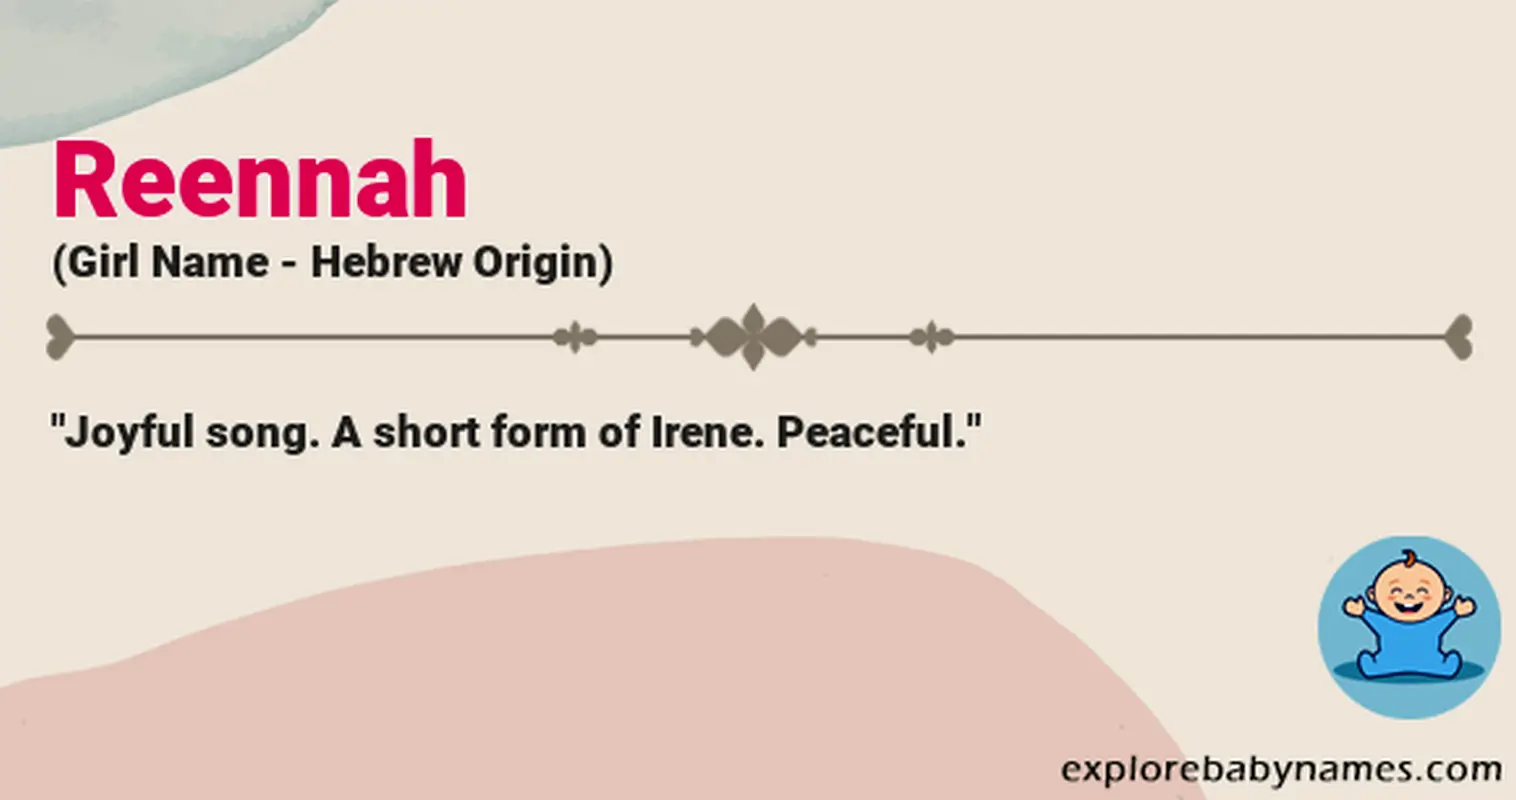 Meaning of Reennah